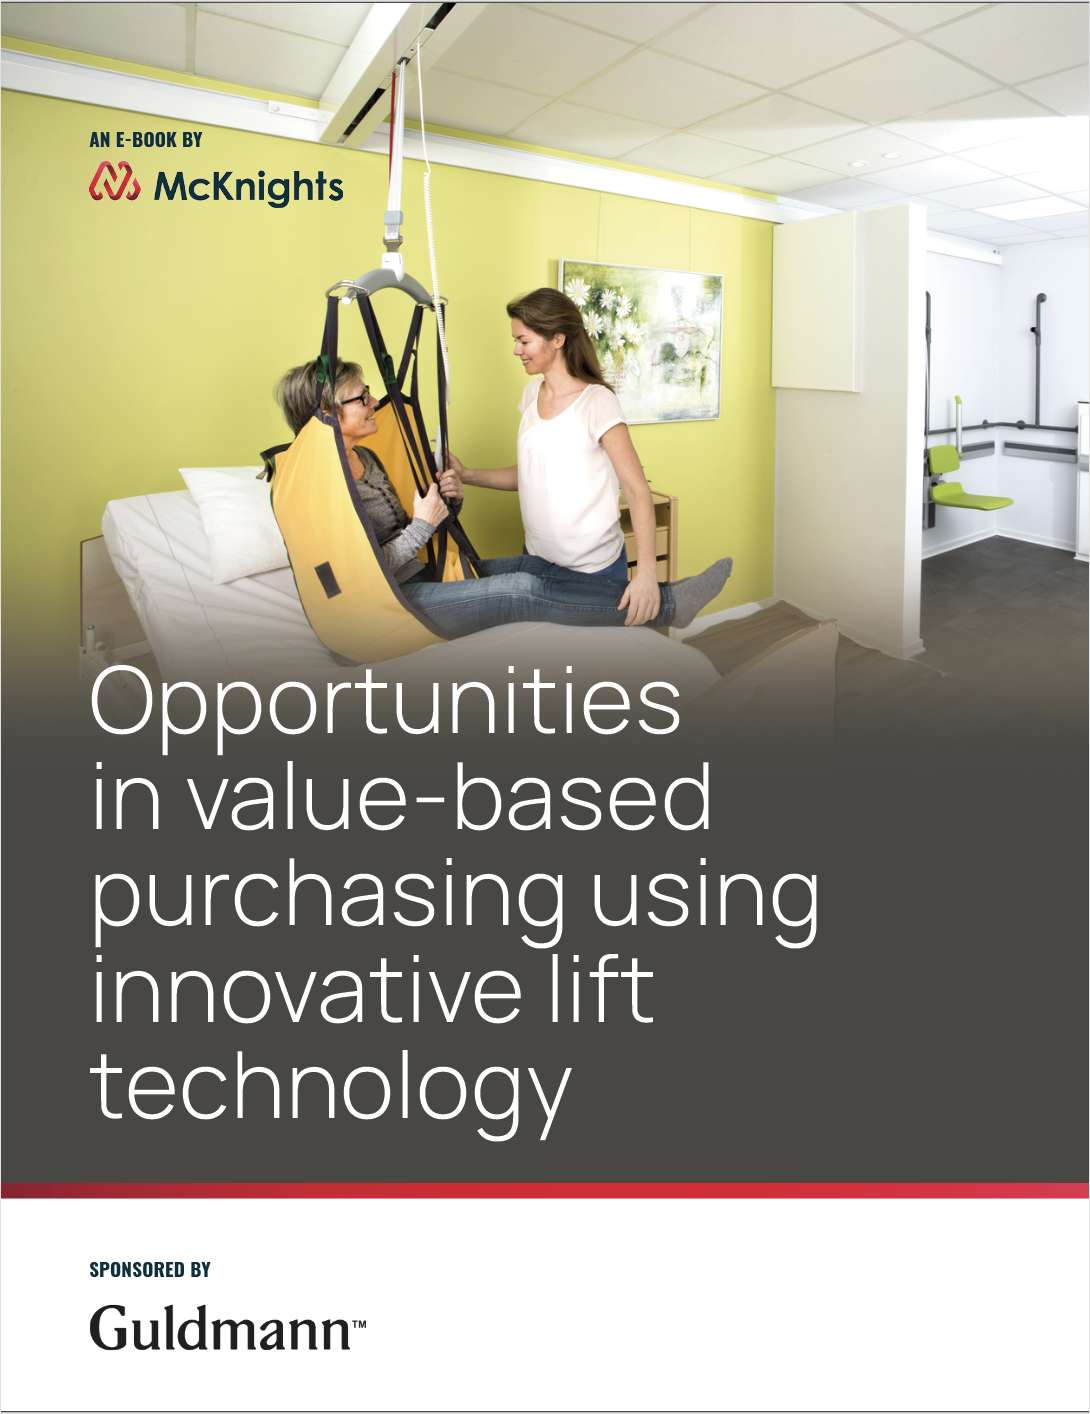 Opportunities in value-based purchasing using innovative lift technology